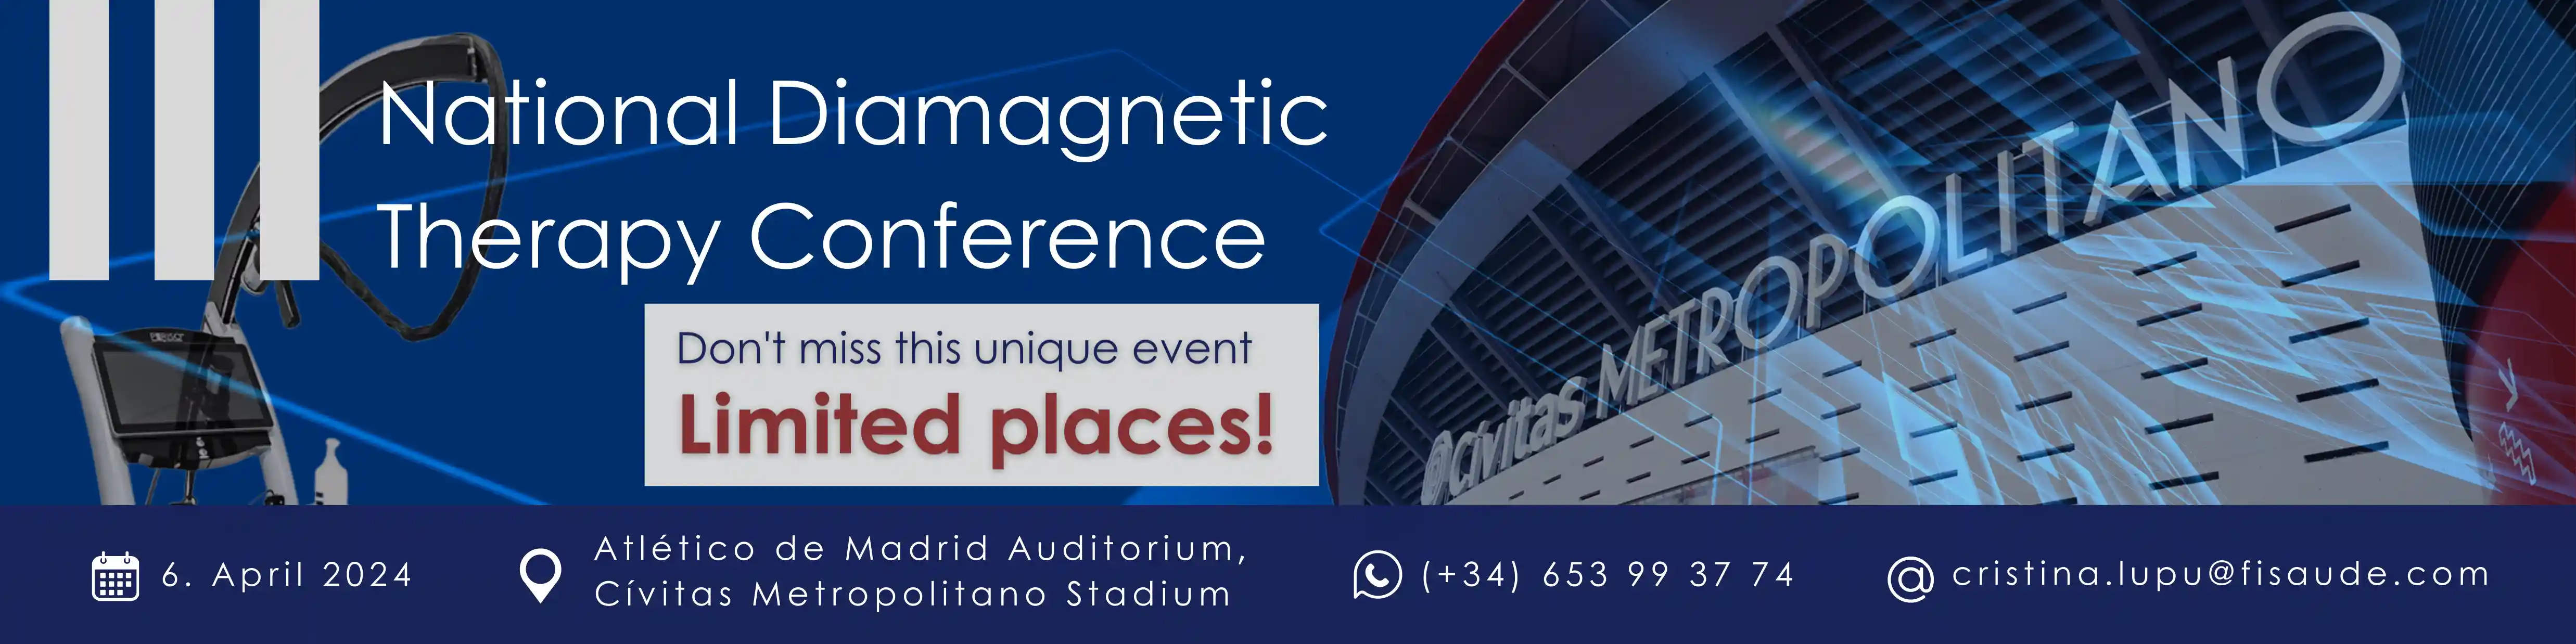 III National Diamagnetic Therapy Conference